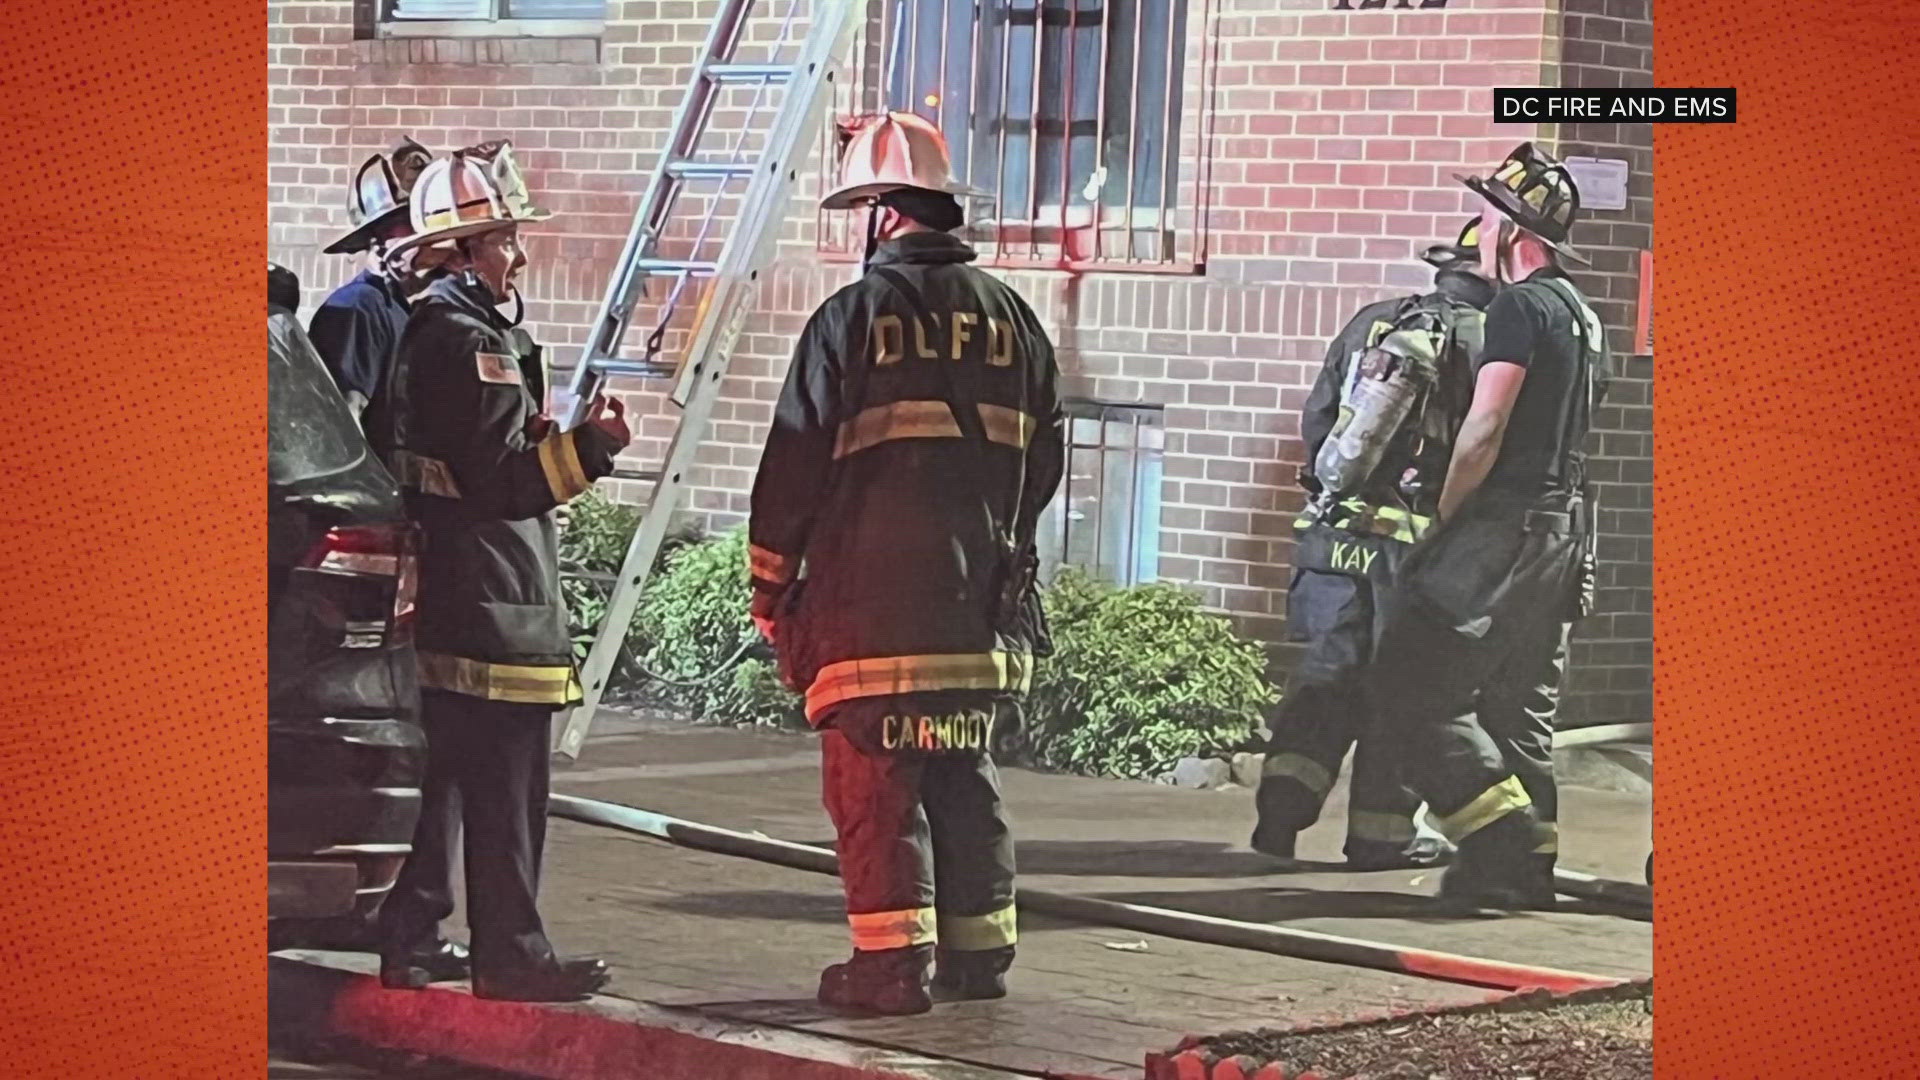 Investigators say the fire involving a dryer happened in the basement apartment early Monday morning.